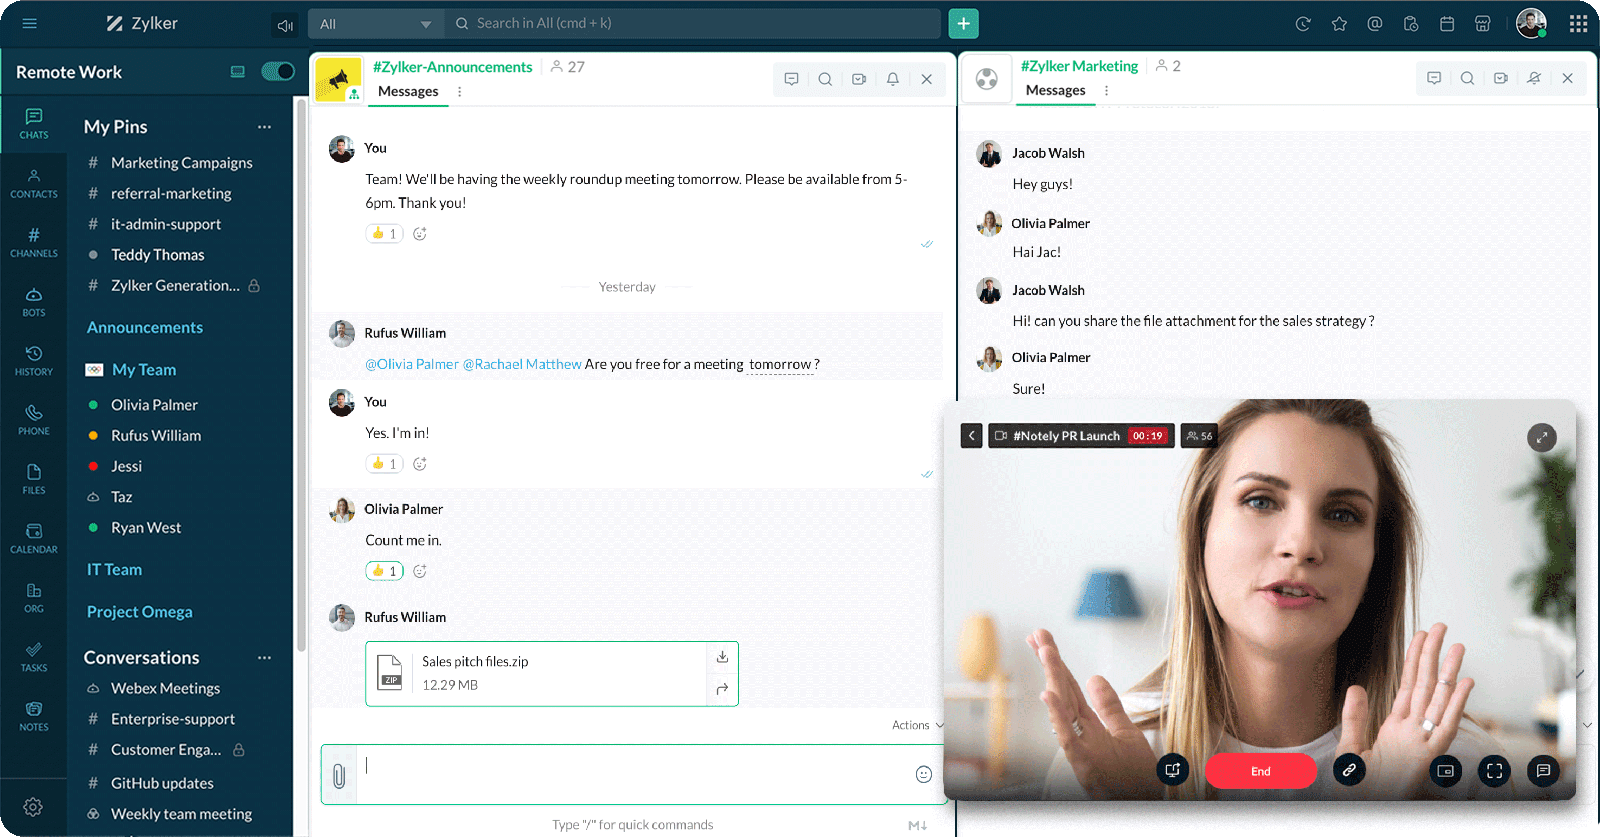 Monitor multiple chats at a time